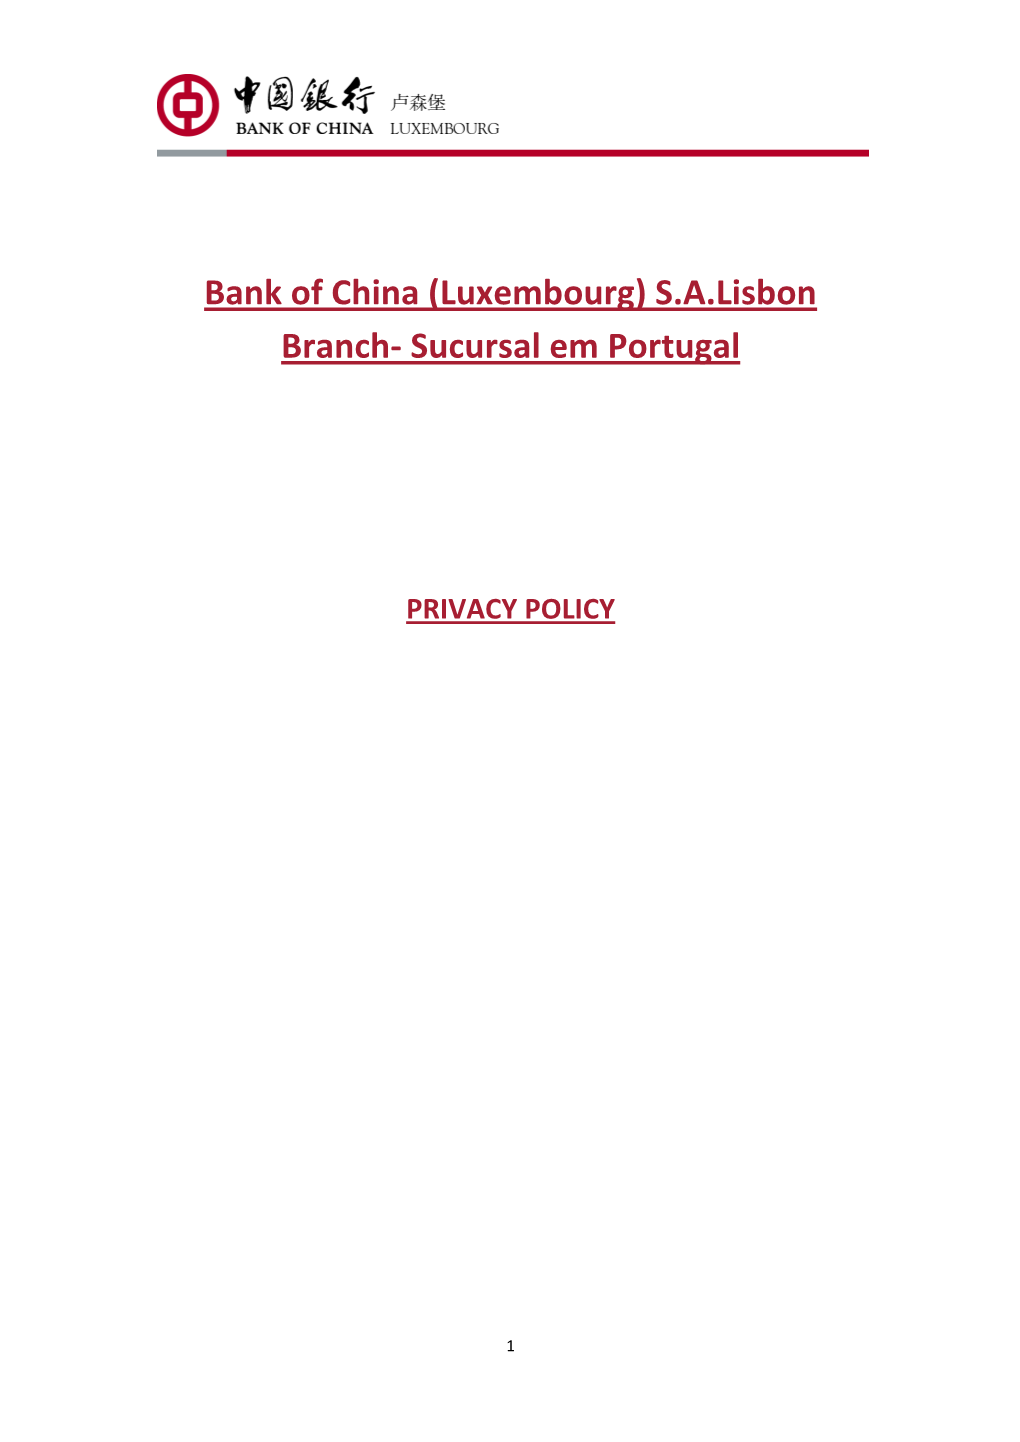 Bank of China (Luxembourg) S.A.Lisbon Branch- Sucursal Em Portugal